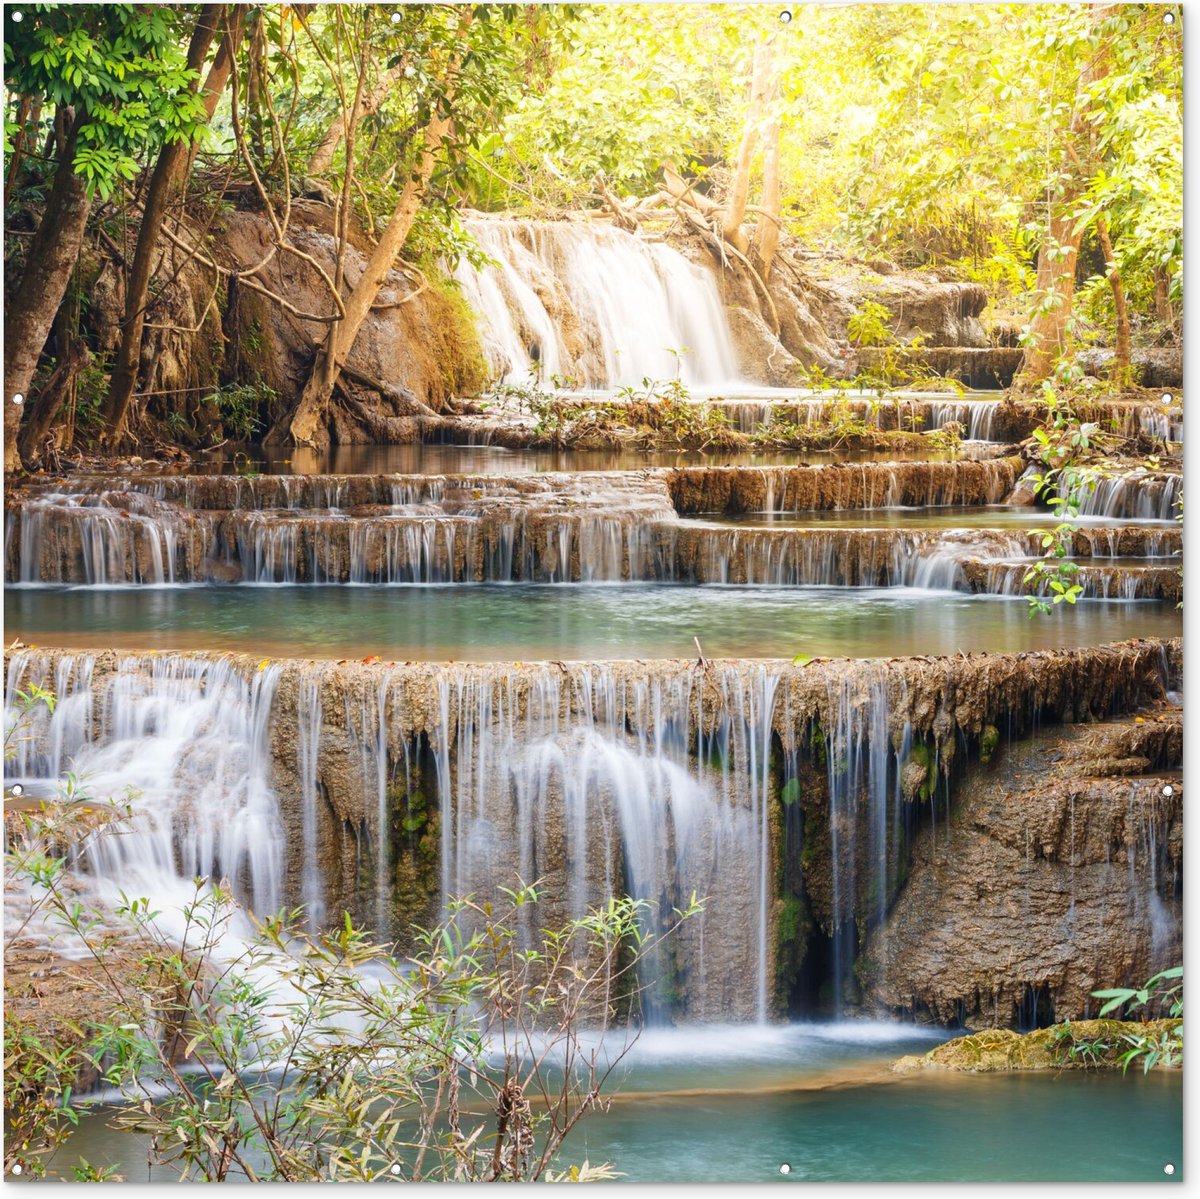 Tuinposter - Waterval - Zon - Water - Bos - Natuur - 200x200 cm - Schuttingdoek - Tuindoek - Tuinposter waterval